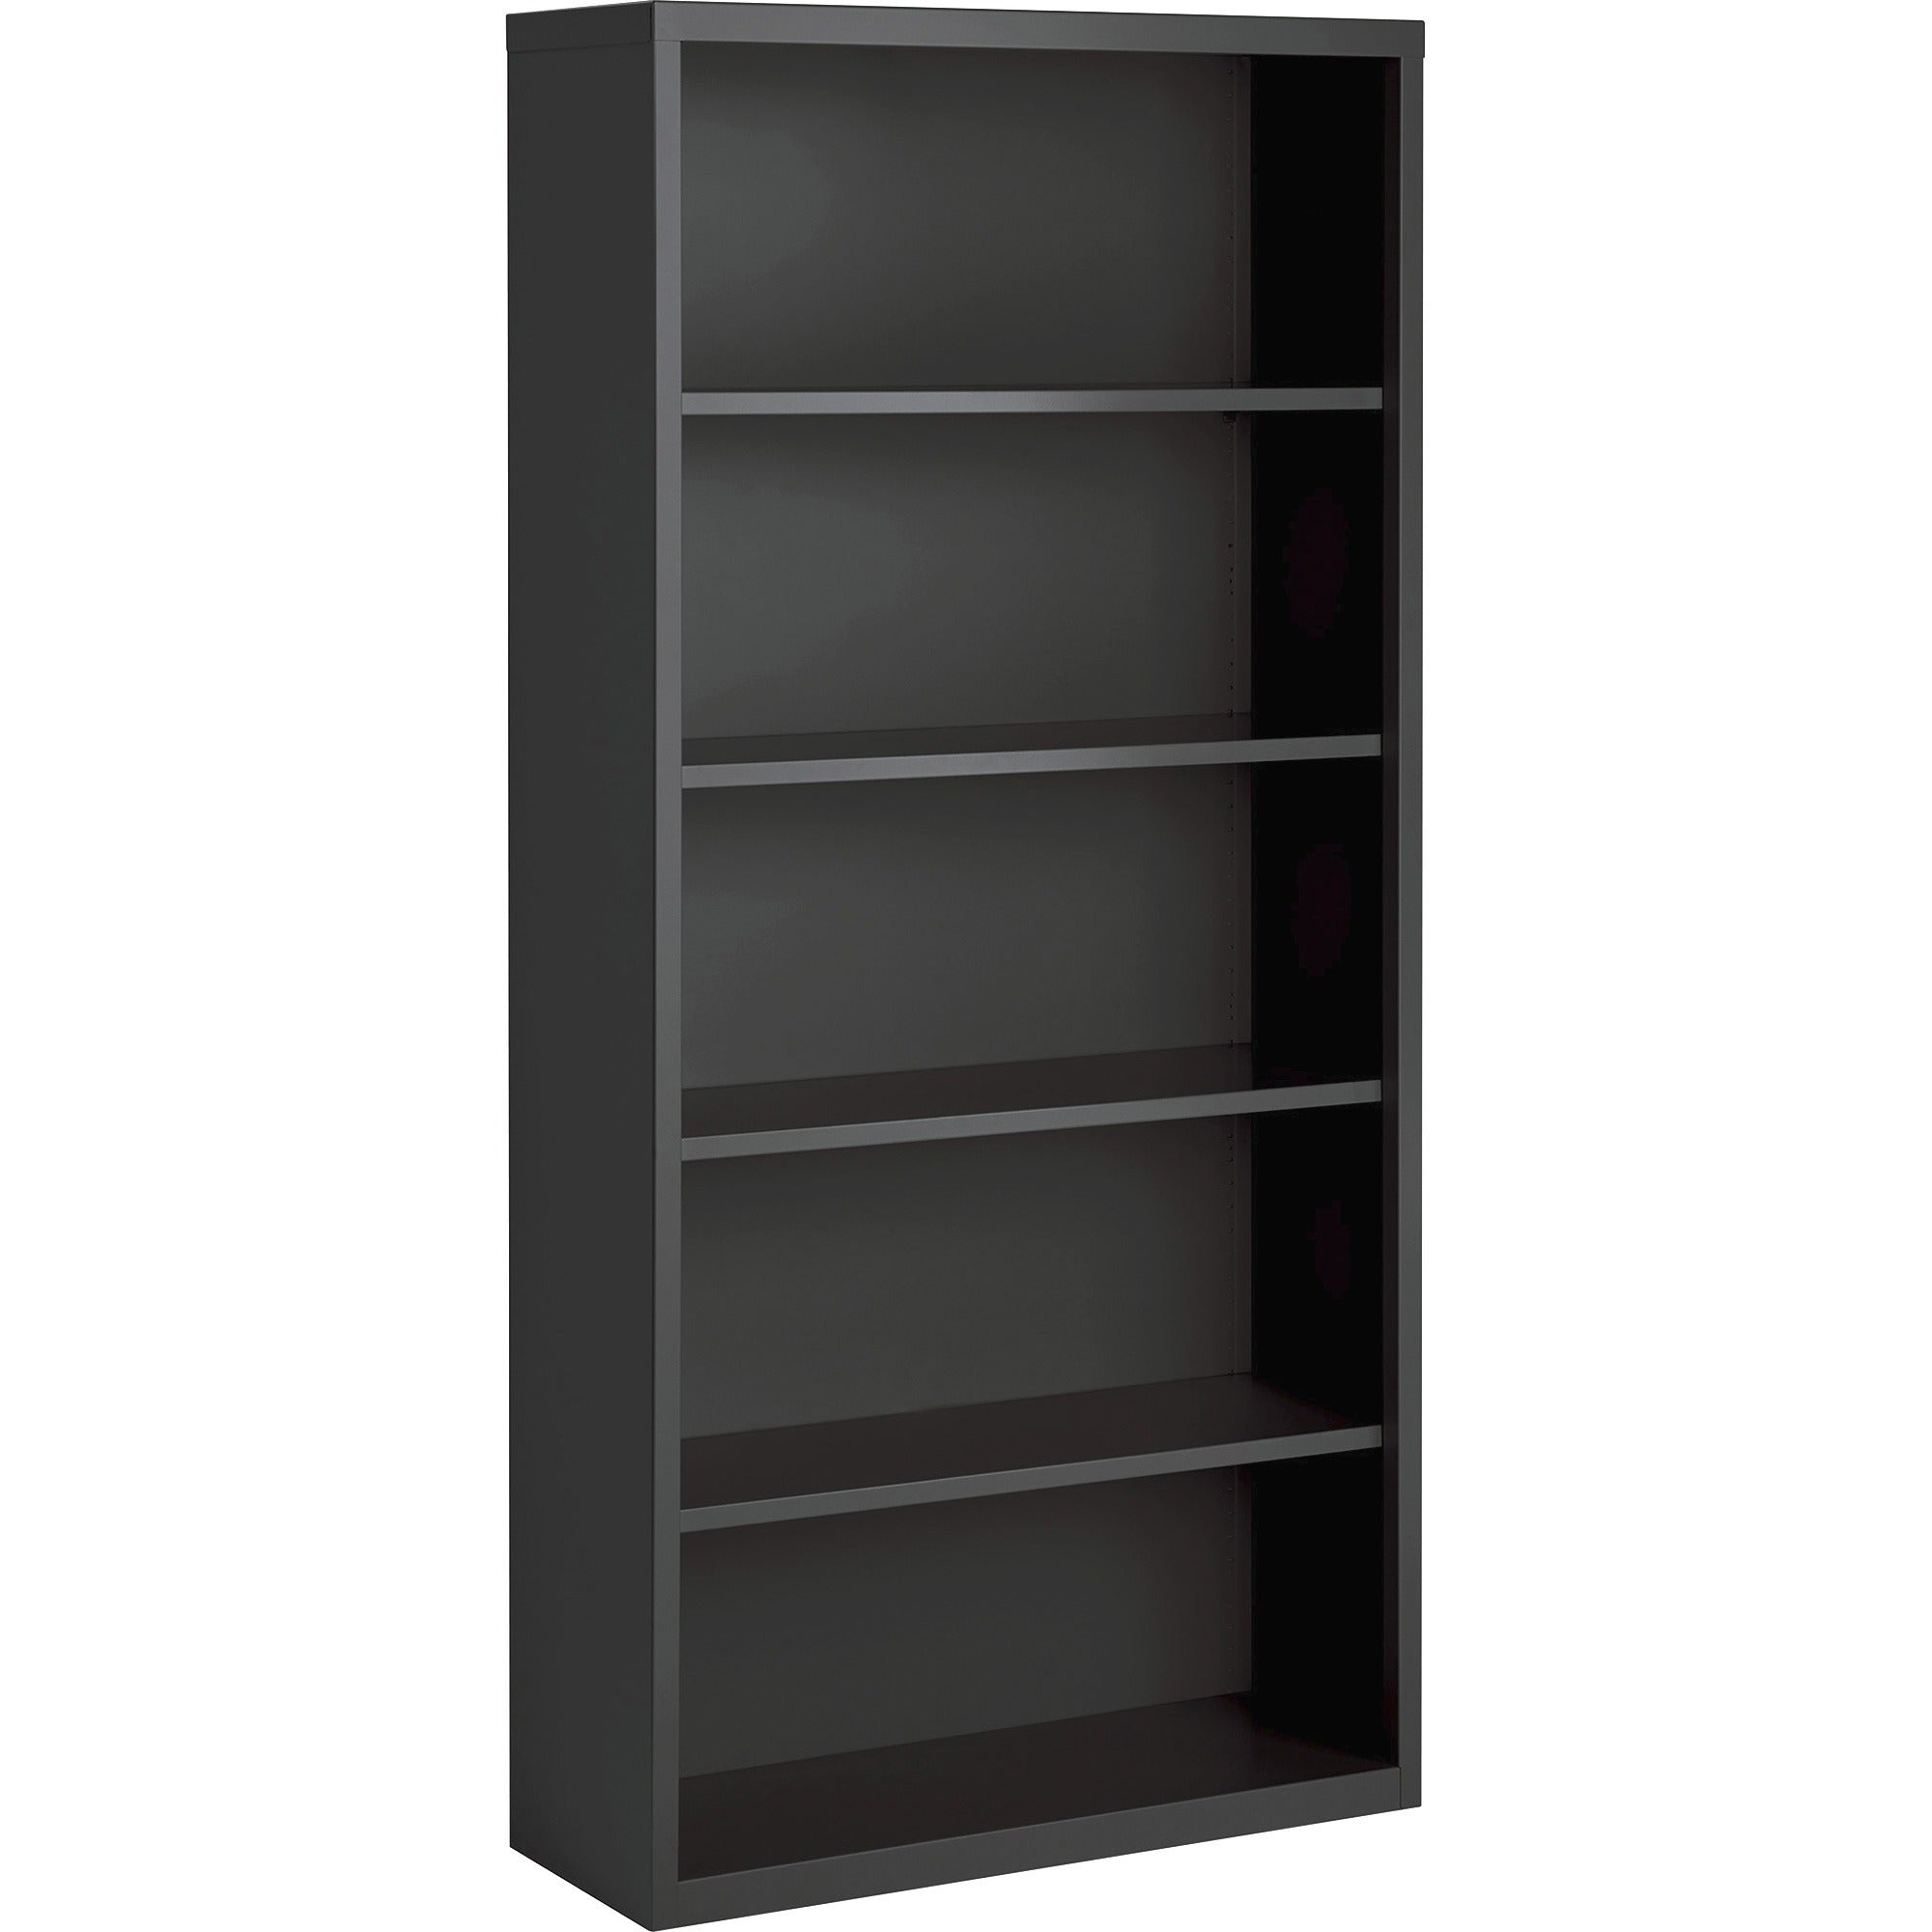 Lorell Fortress Series Bookcase - 34.5" x 13"72" - 5 Shelve(s) - Material: Steel - Finish: Charcoal, Powder Coated - Adjustable Shelf, Welded, Durable - 1